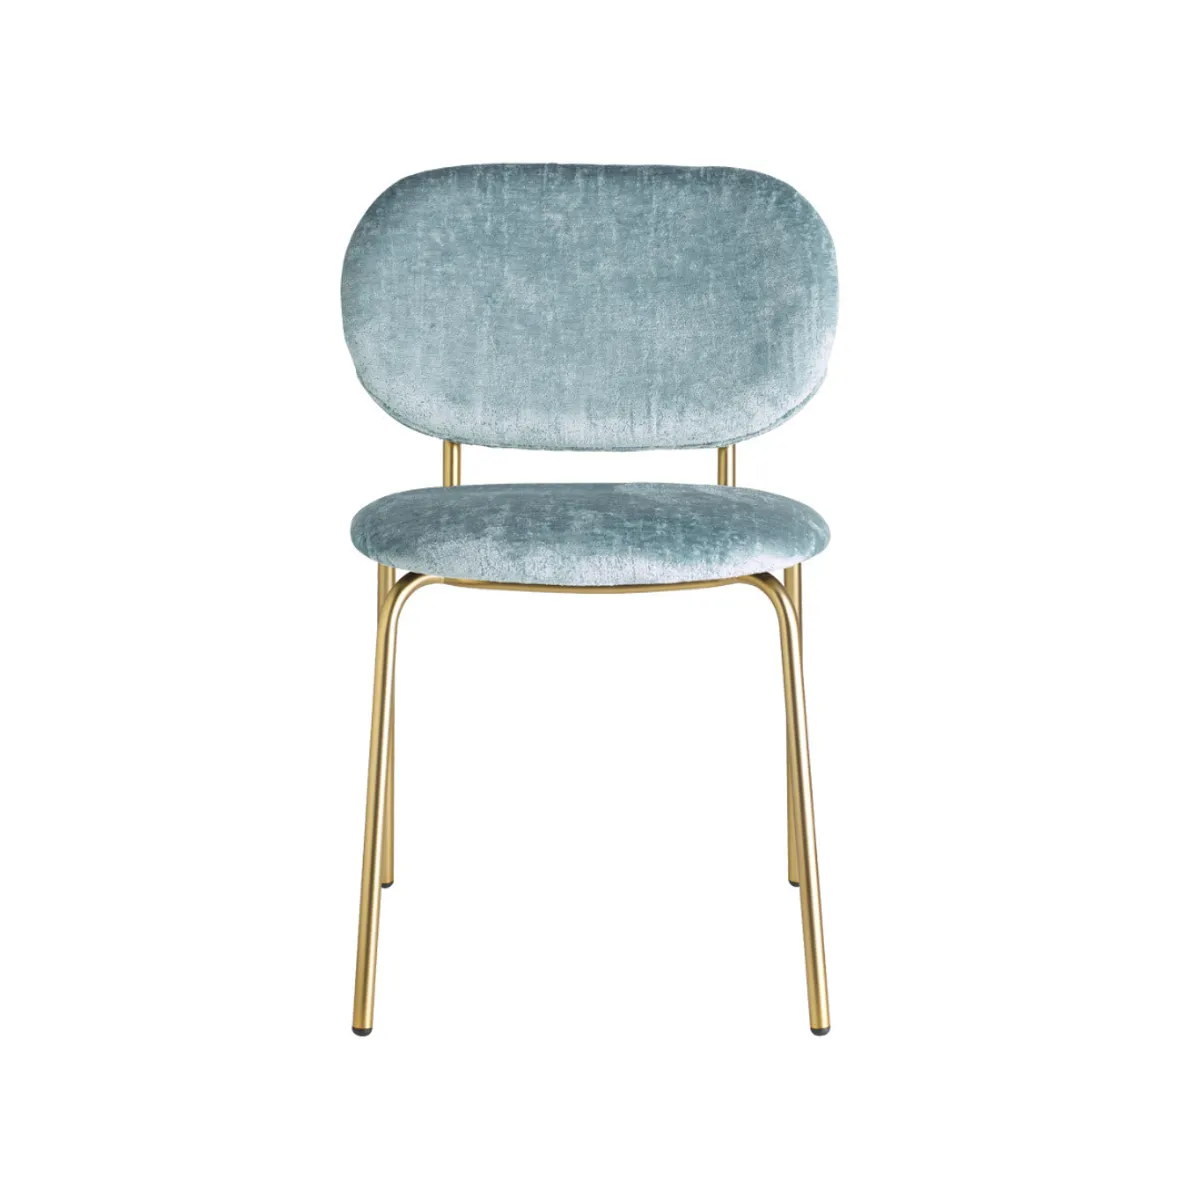 Layla soft side chair 9